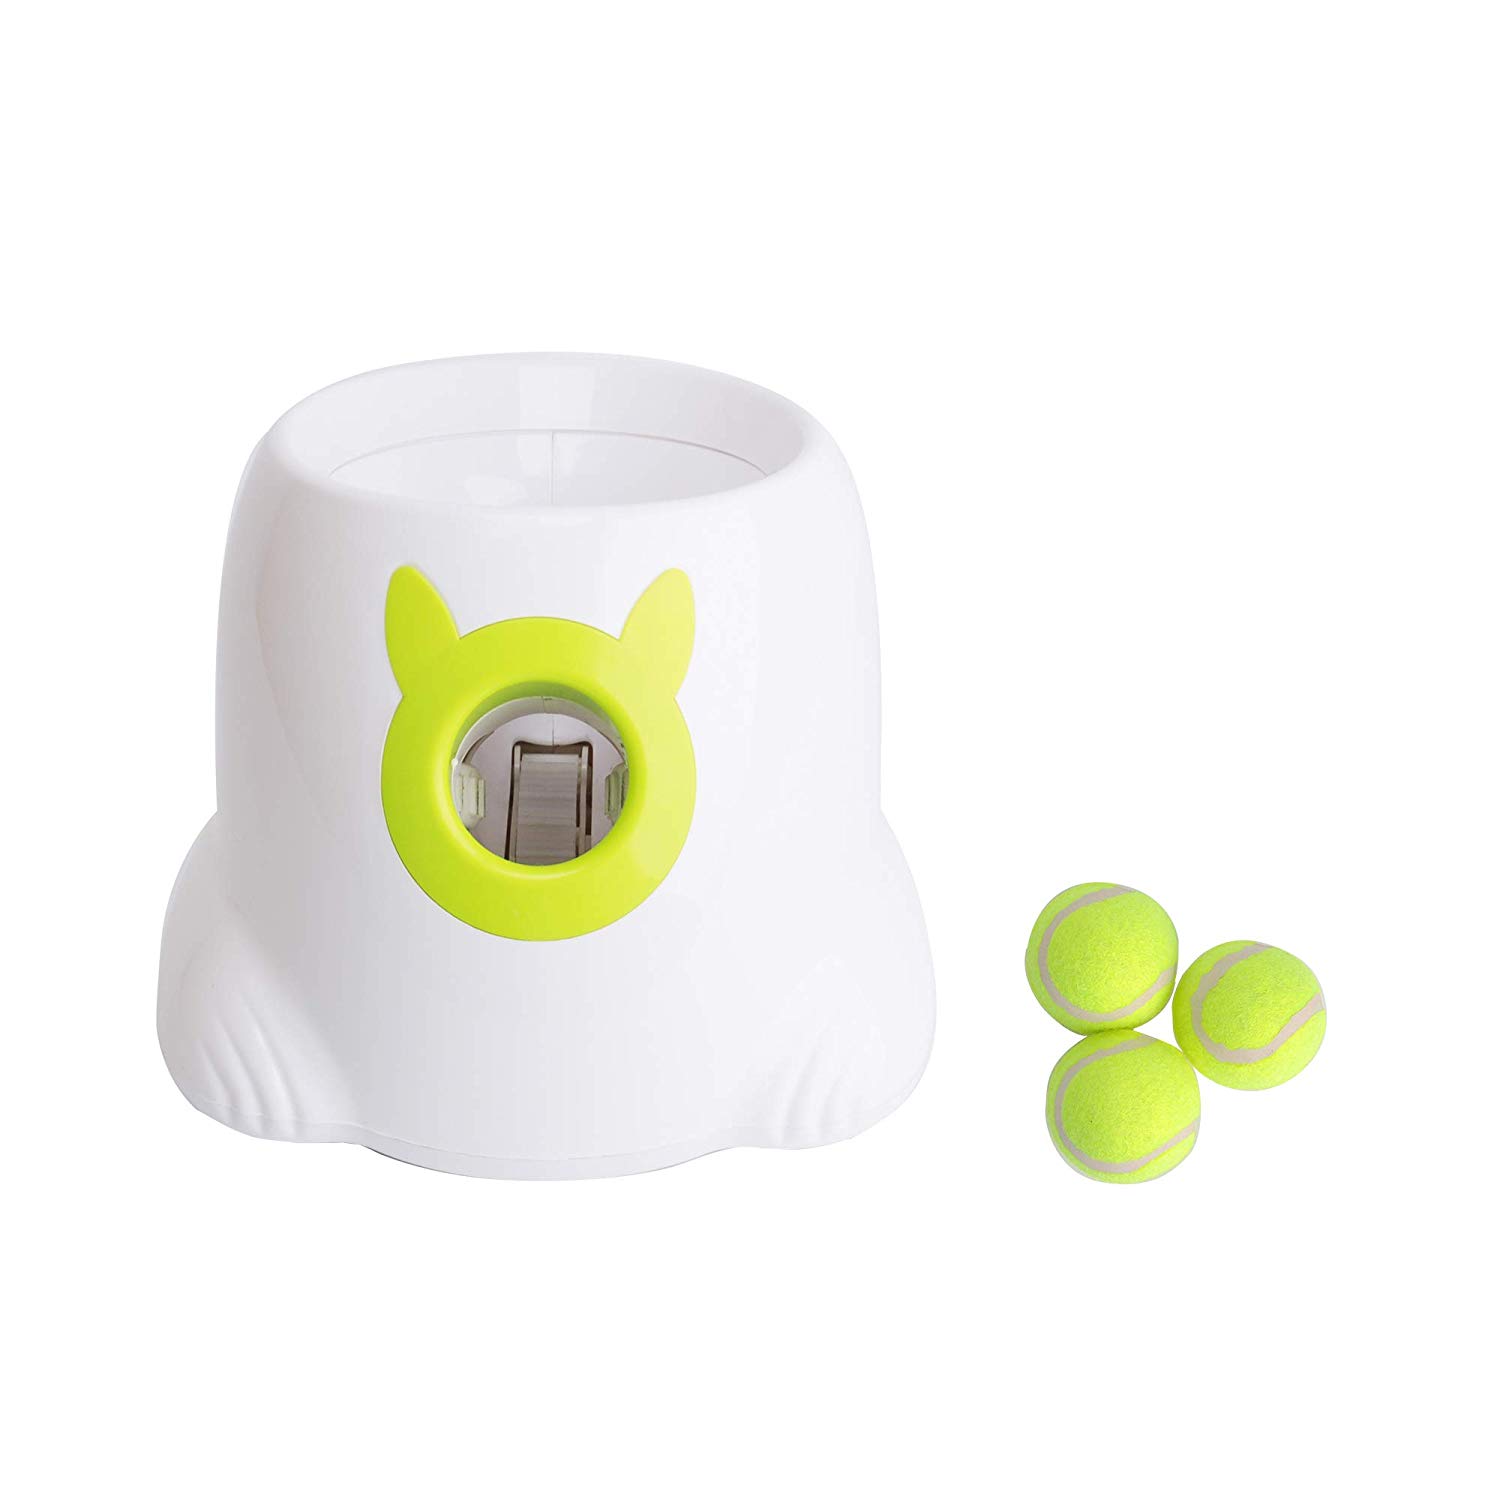 KARMAS PRODUCT Interactive Ball Launcher for Dogs with Tennis Balls,Tennis Ball Throwing Machine for Trainning